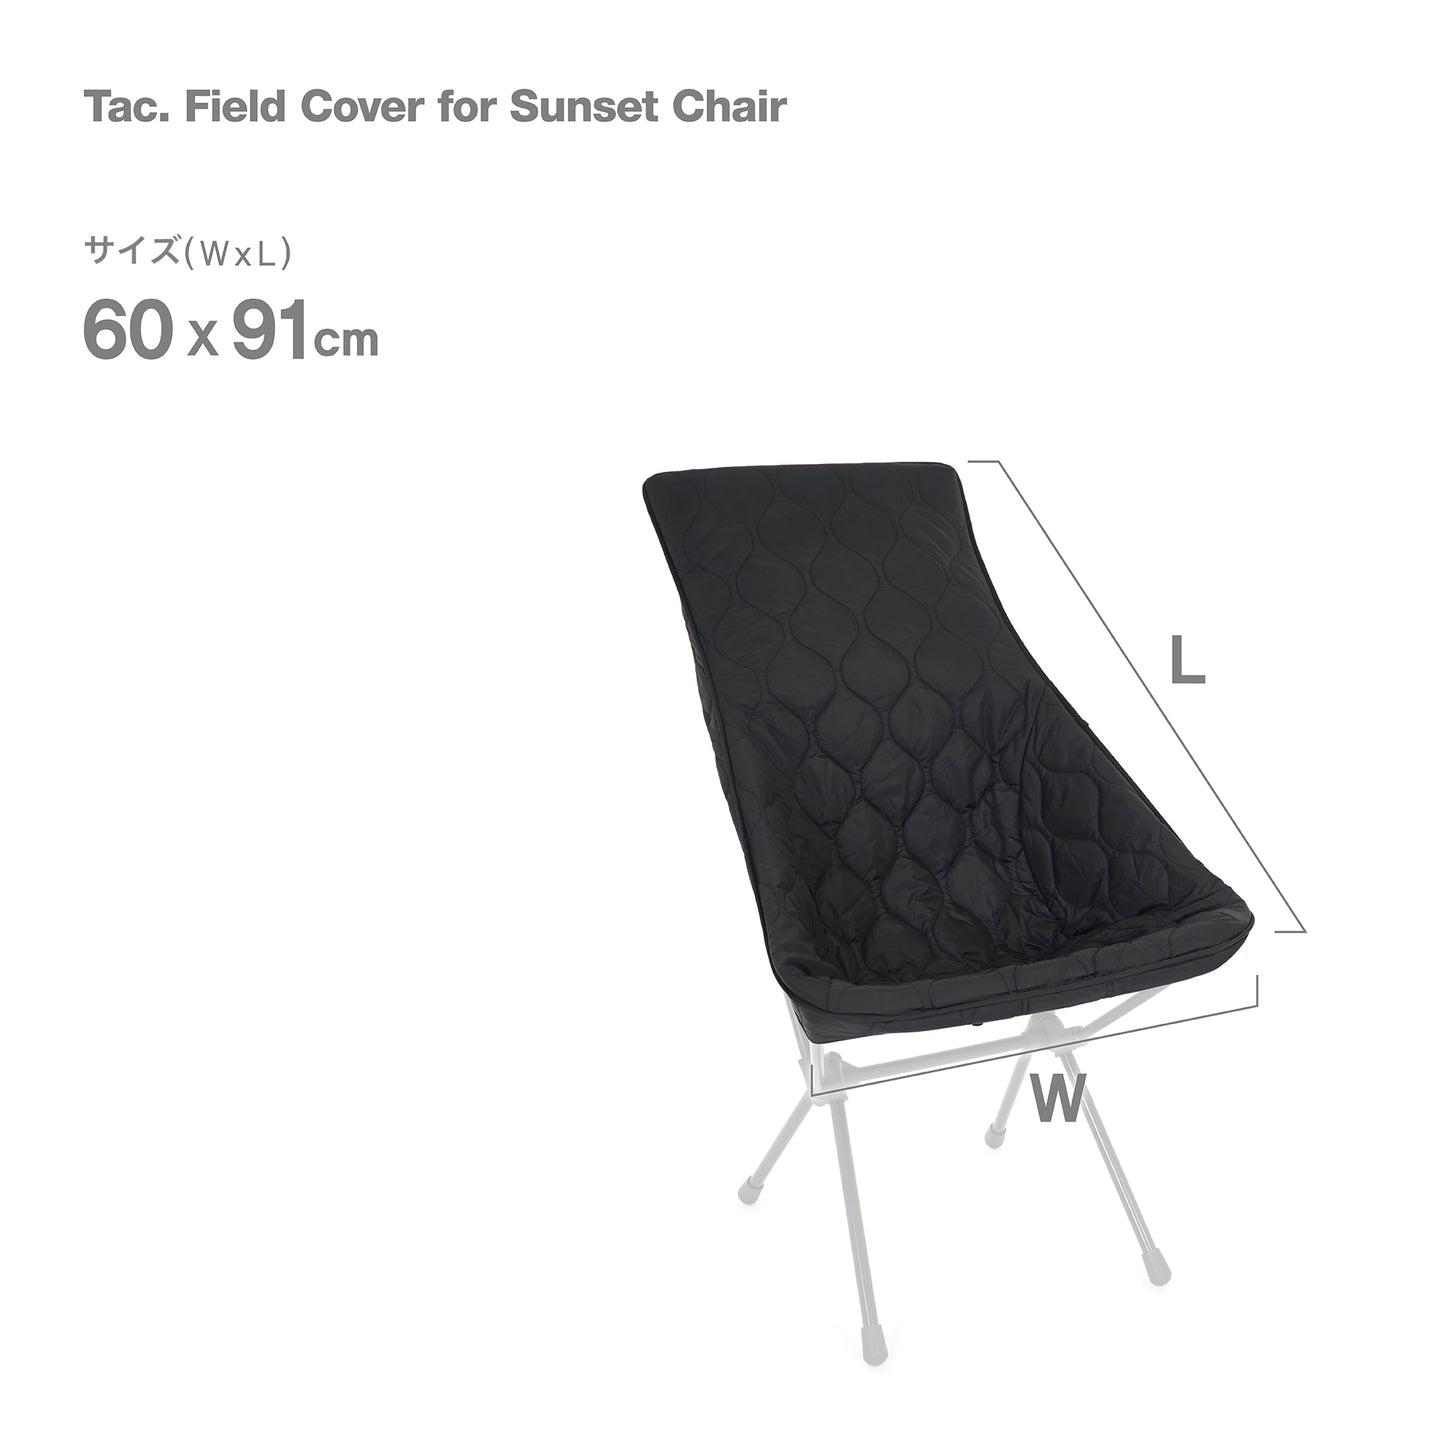 Tac. Field Cover for Sunset Chair - Black / Foliage Green